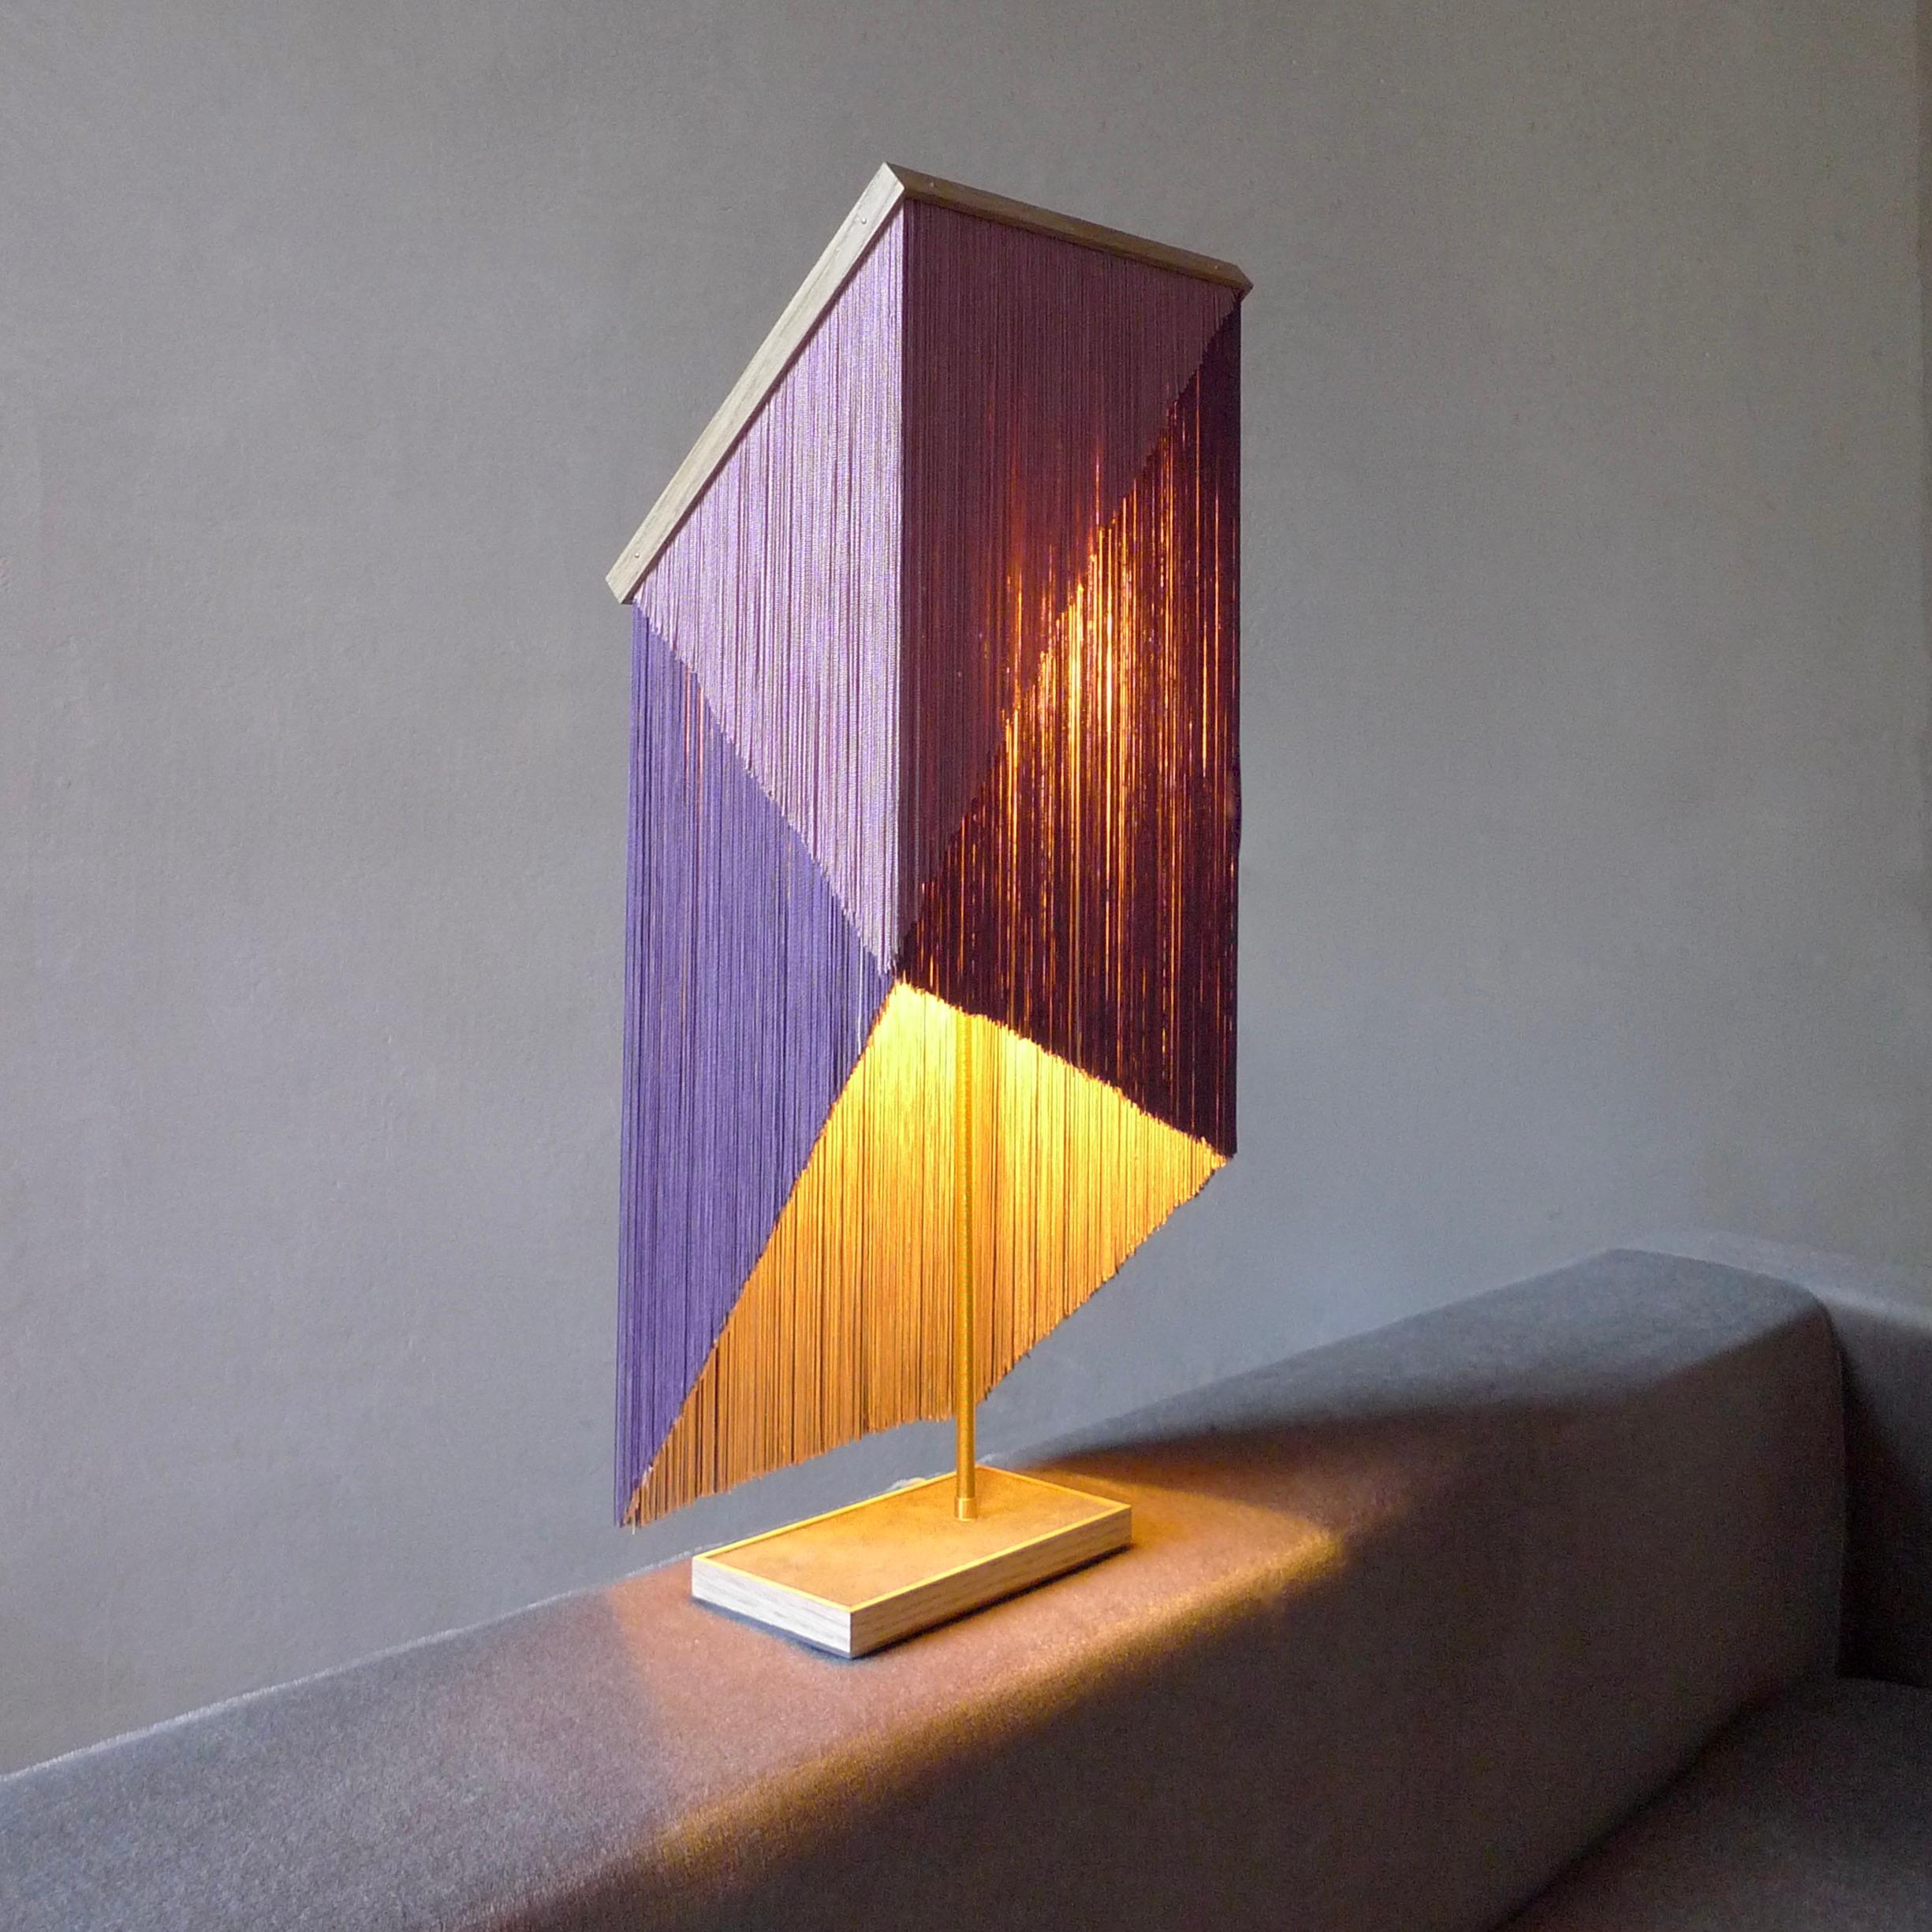 No. 29 Table Lamp by Sander Bottinga
Object size 2 
Dimensions: W 26 x D 26 x H 57 - 75 cm
Materials: Brass, Wood, Leather, Viscose Fringes
Variations available.

Handmade in brass, wood, leather and 3 double layered viscose fringes